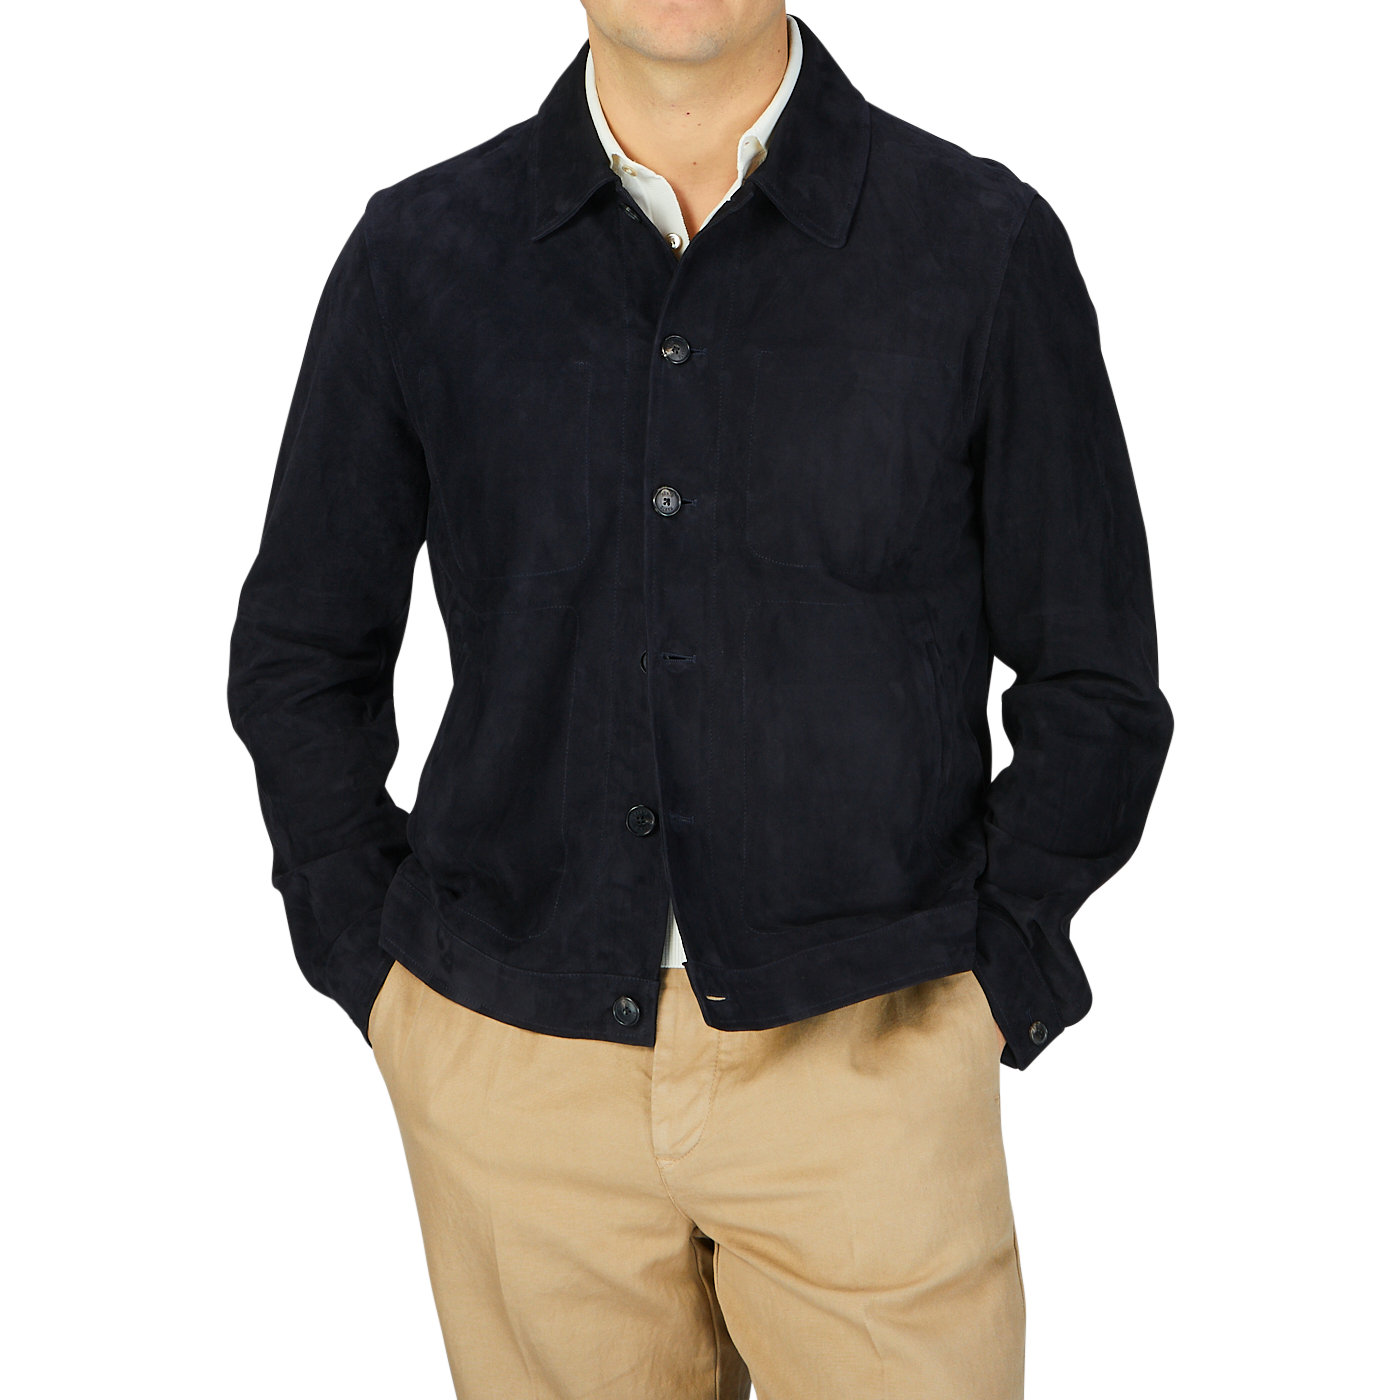 A man wearing a Manto navy blue suede leather overshirt and tan pants.